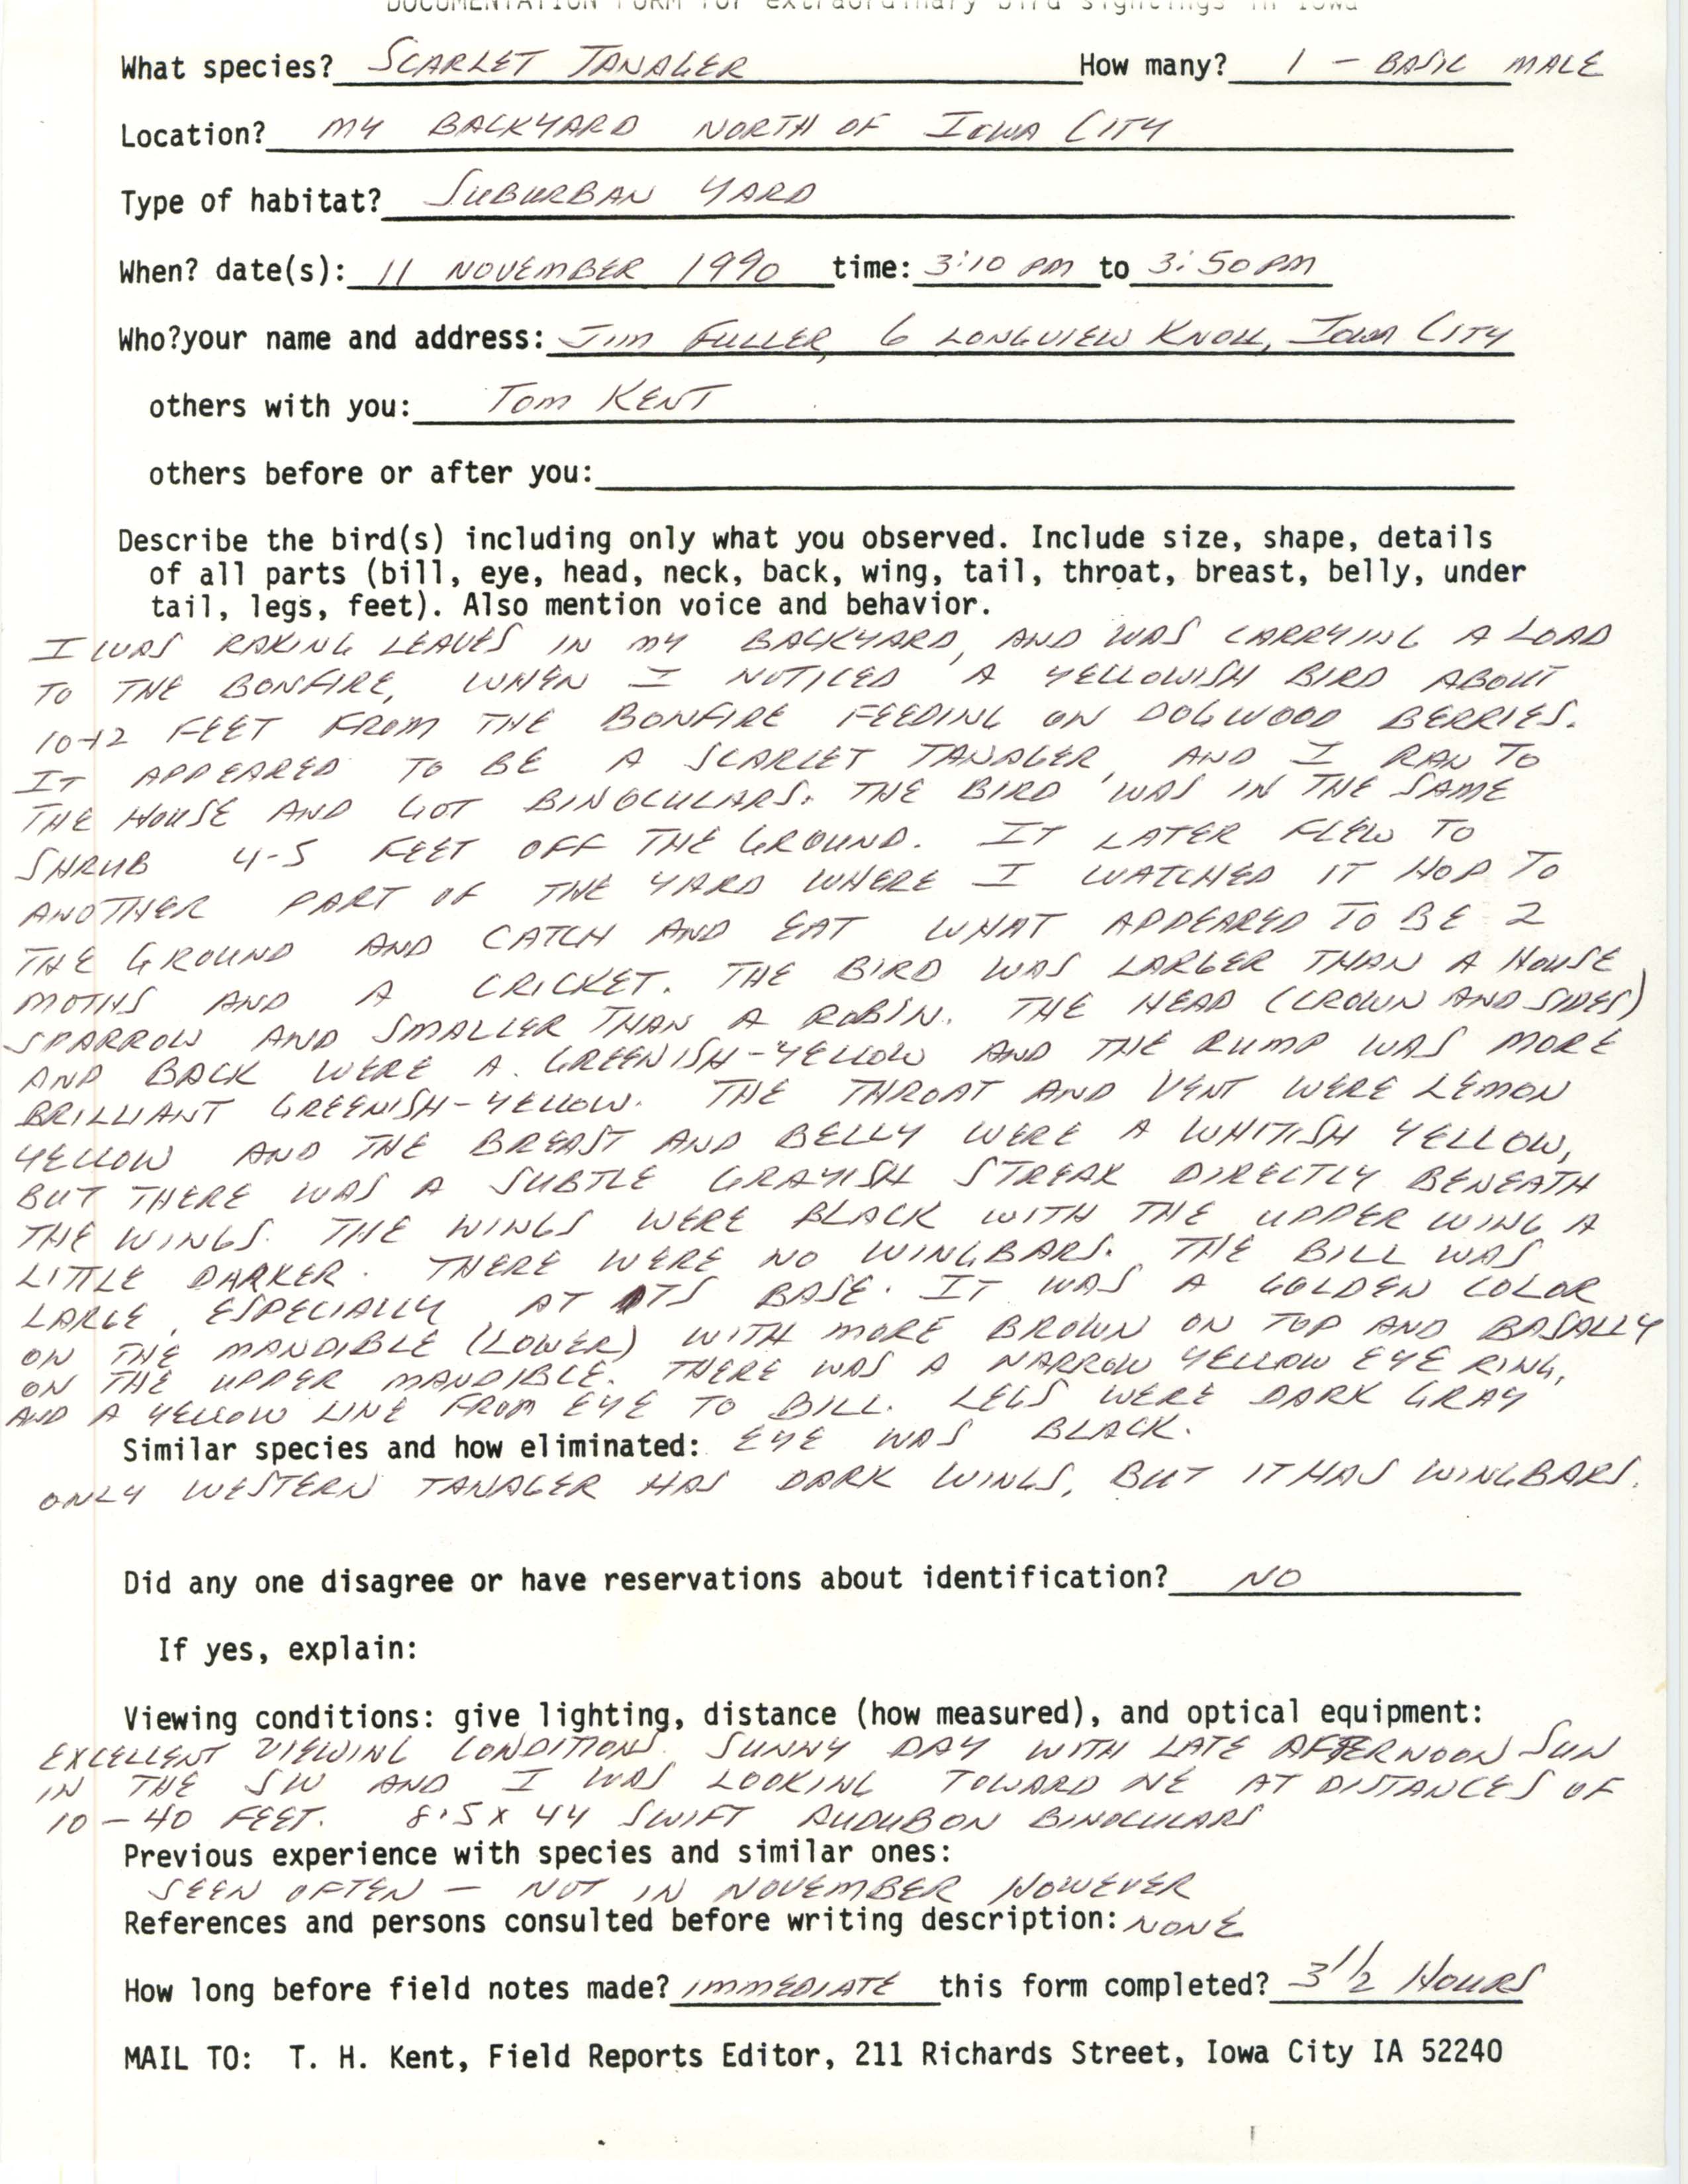 Rare bird documentation form for Scarlet Tanager north of Iowa City, 1990